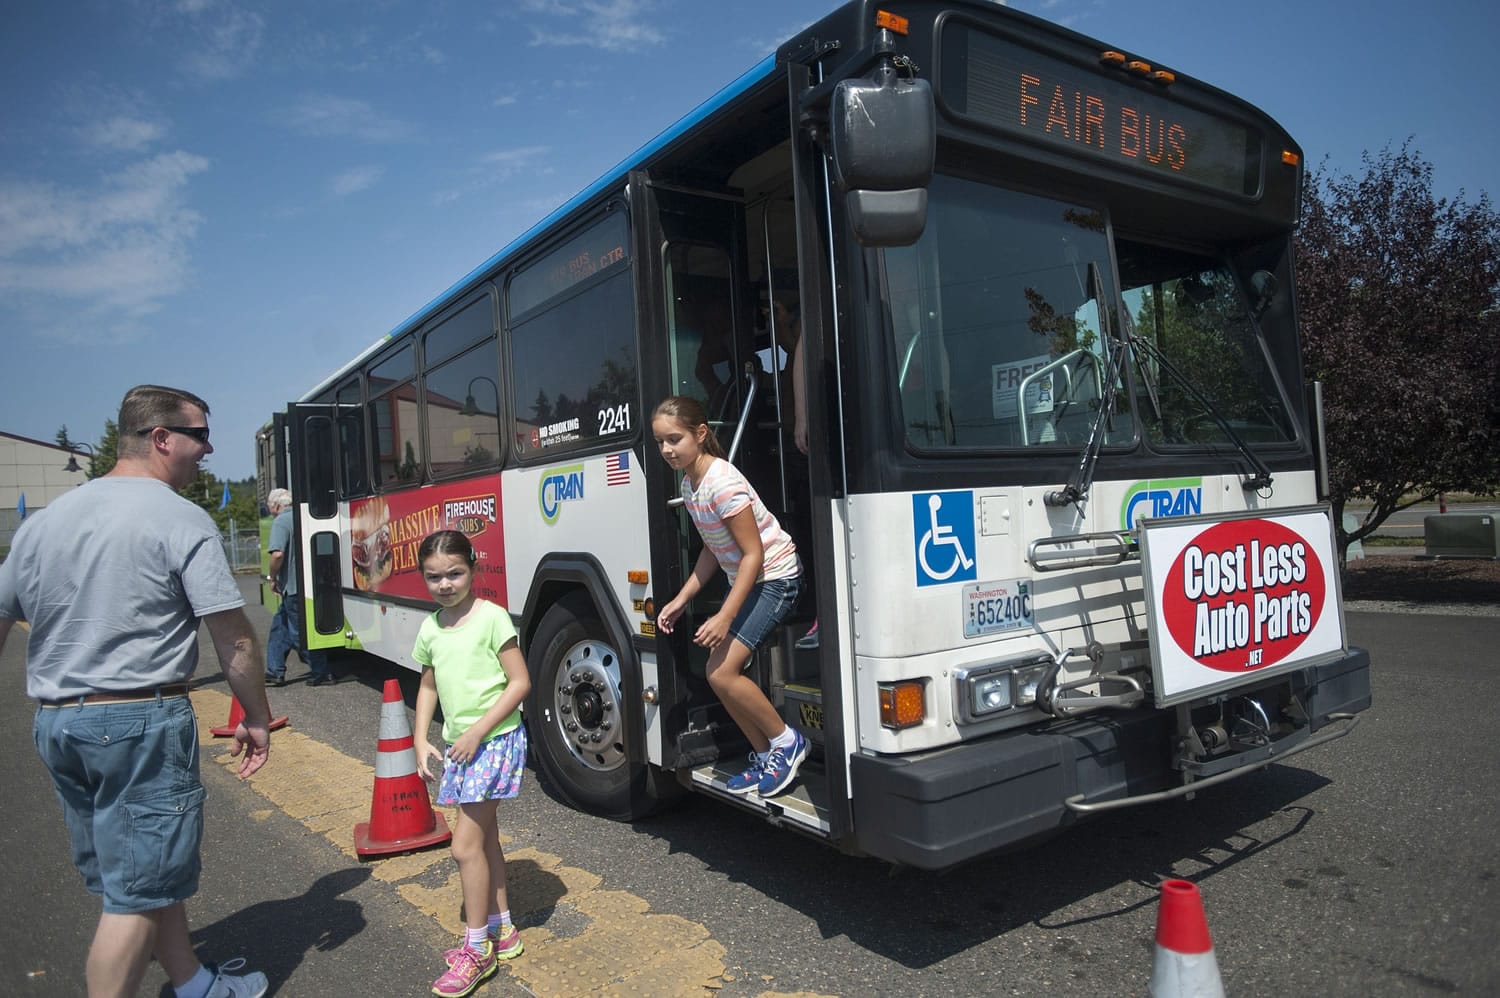 A C-Tran bus drops off passengers at the Clark County Fair in Ridgefield on Wednesday.